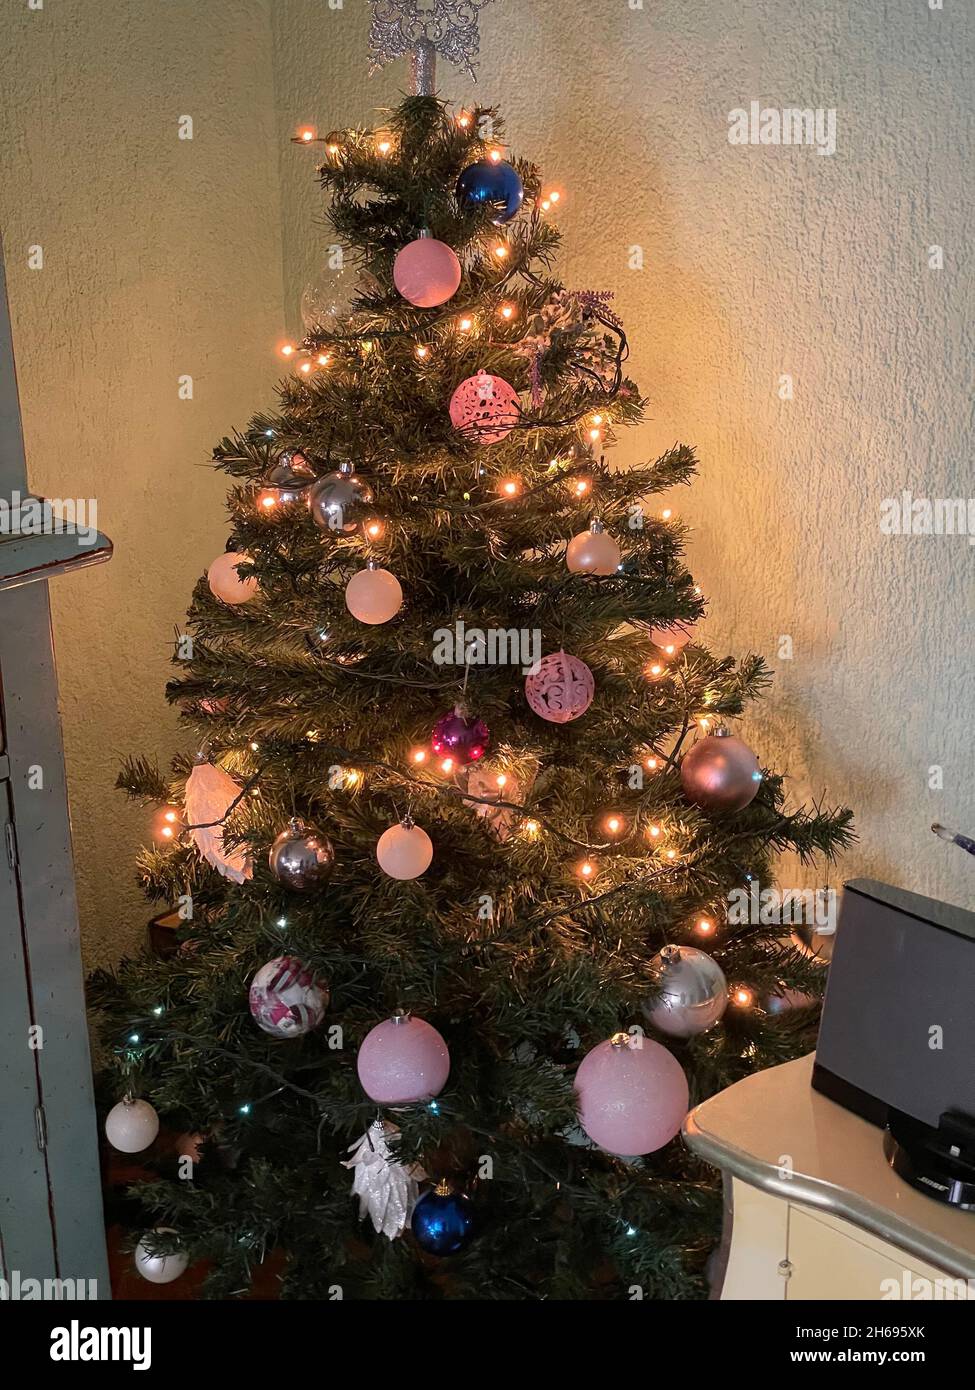 Merry christmas home indoor warm interior with happy new year 2020 decor with Xmas tree Stock Photo